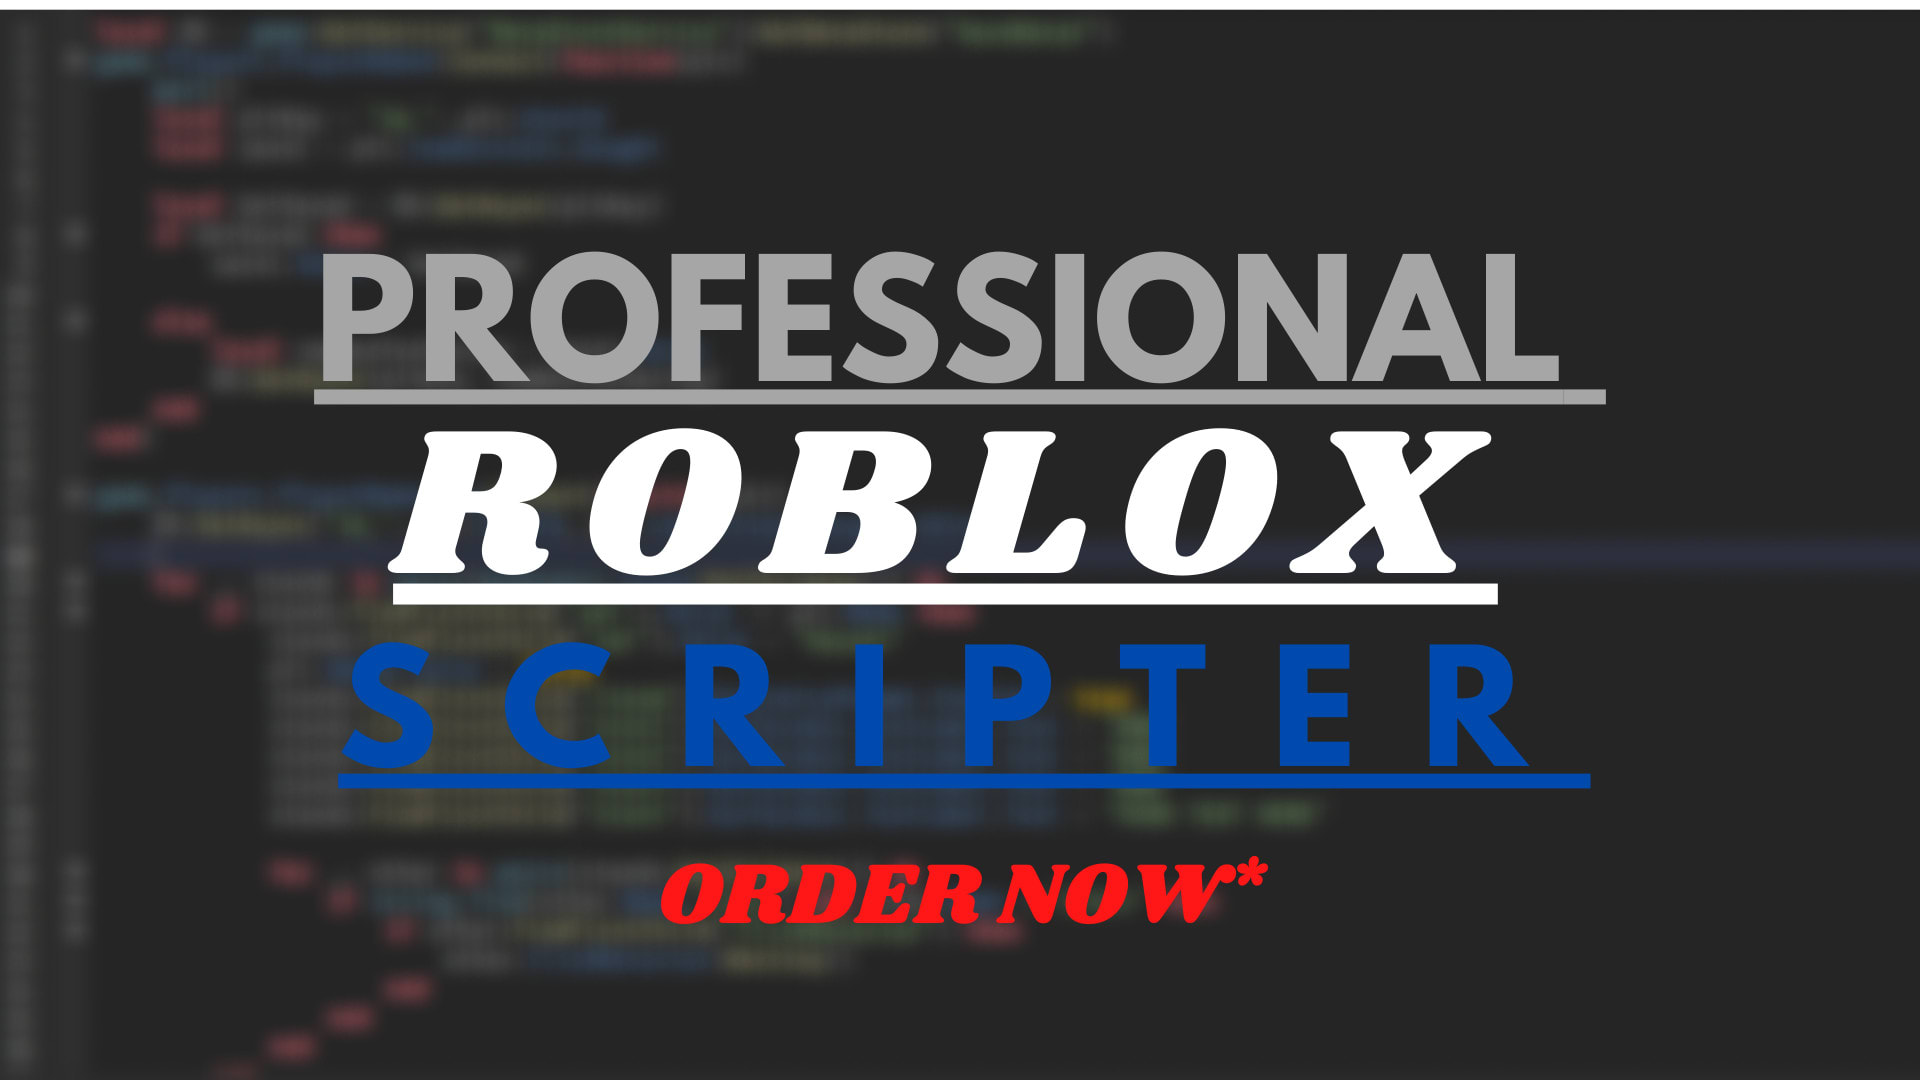 Script for you on roblox as a professional scripter by Brainlystudios